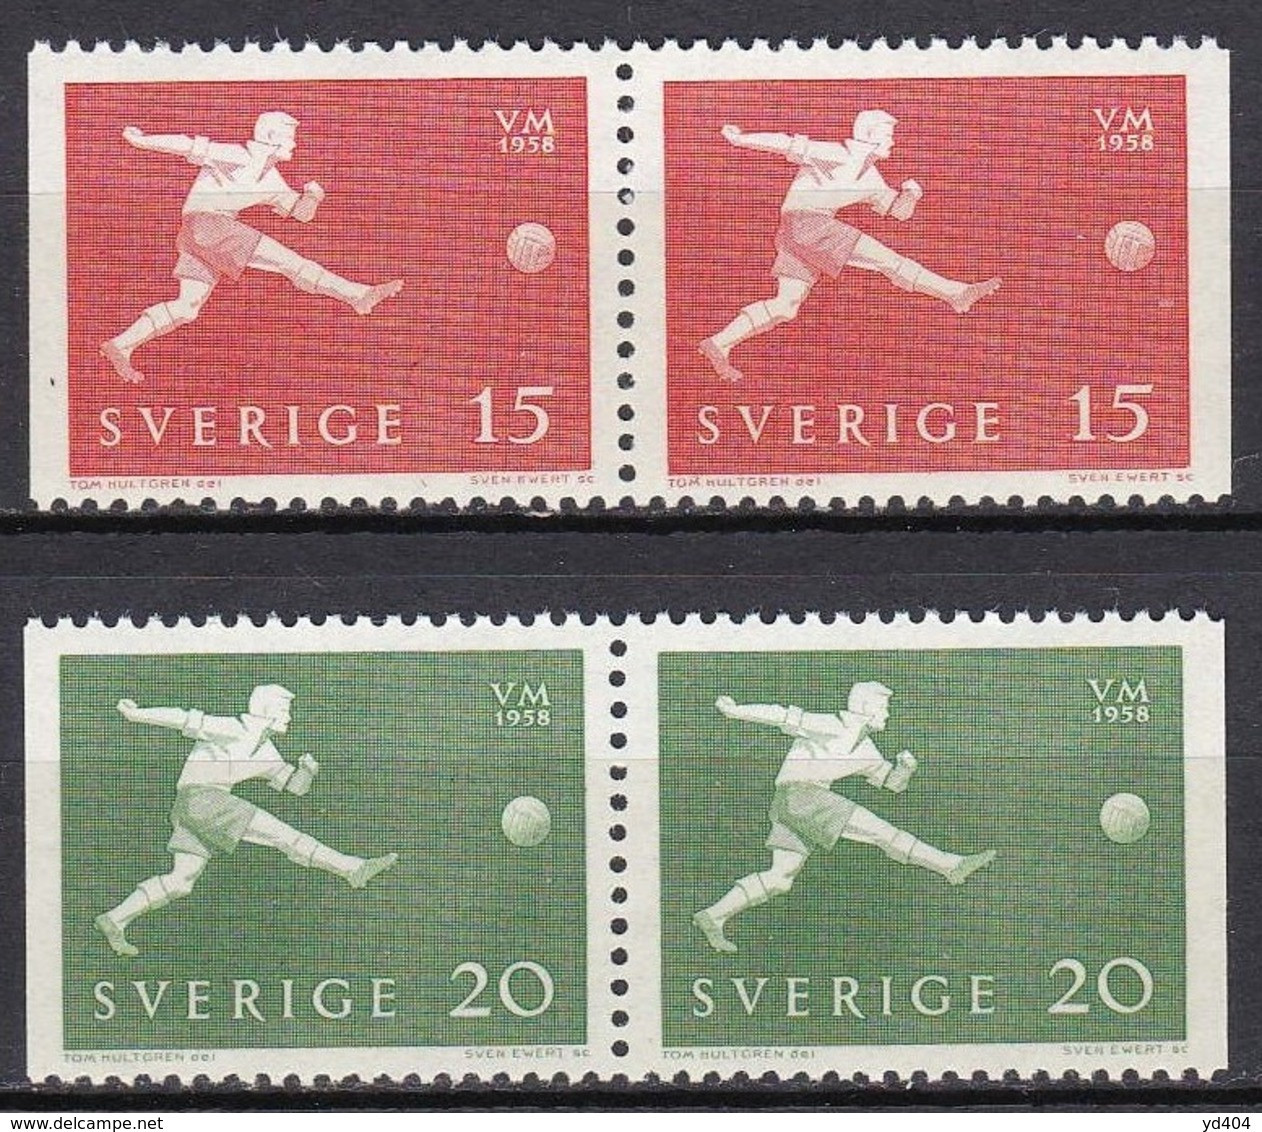 SE433 – SUEDE – SWEDEN – 1958 – WORLD FOOTBALL CUP - Y&T # 429/430 MNH - Neufs